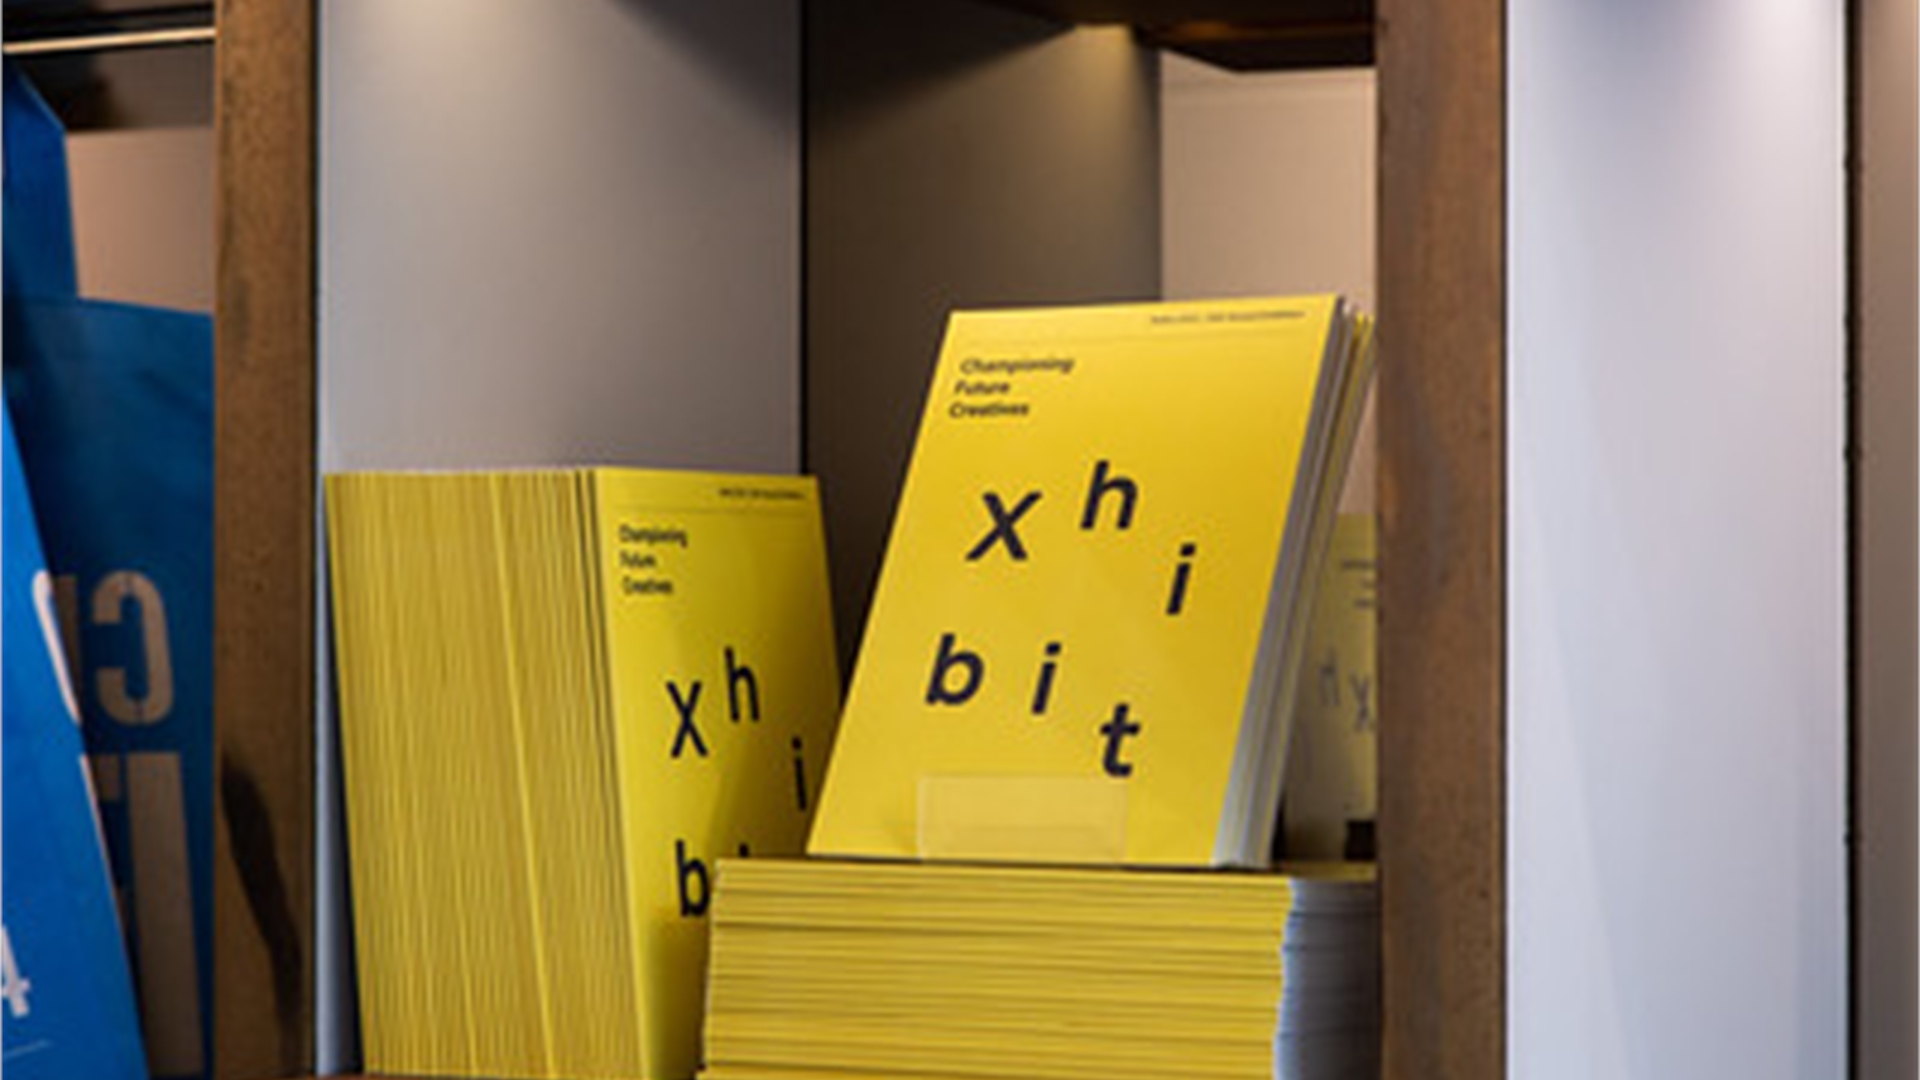 Originally founded in 1997 by Chelsea College of Art and Design graduates Kit Hammonds and Angela Robinson, Xhibit aims to showcase the best emerging creatives from UAL.